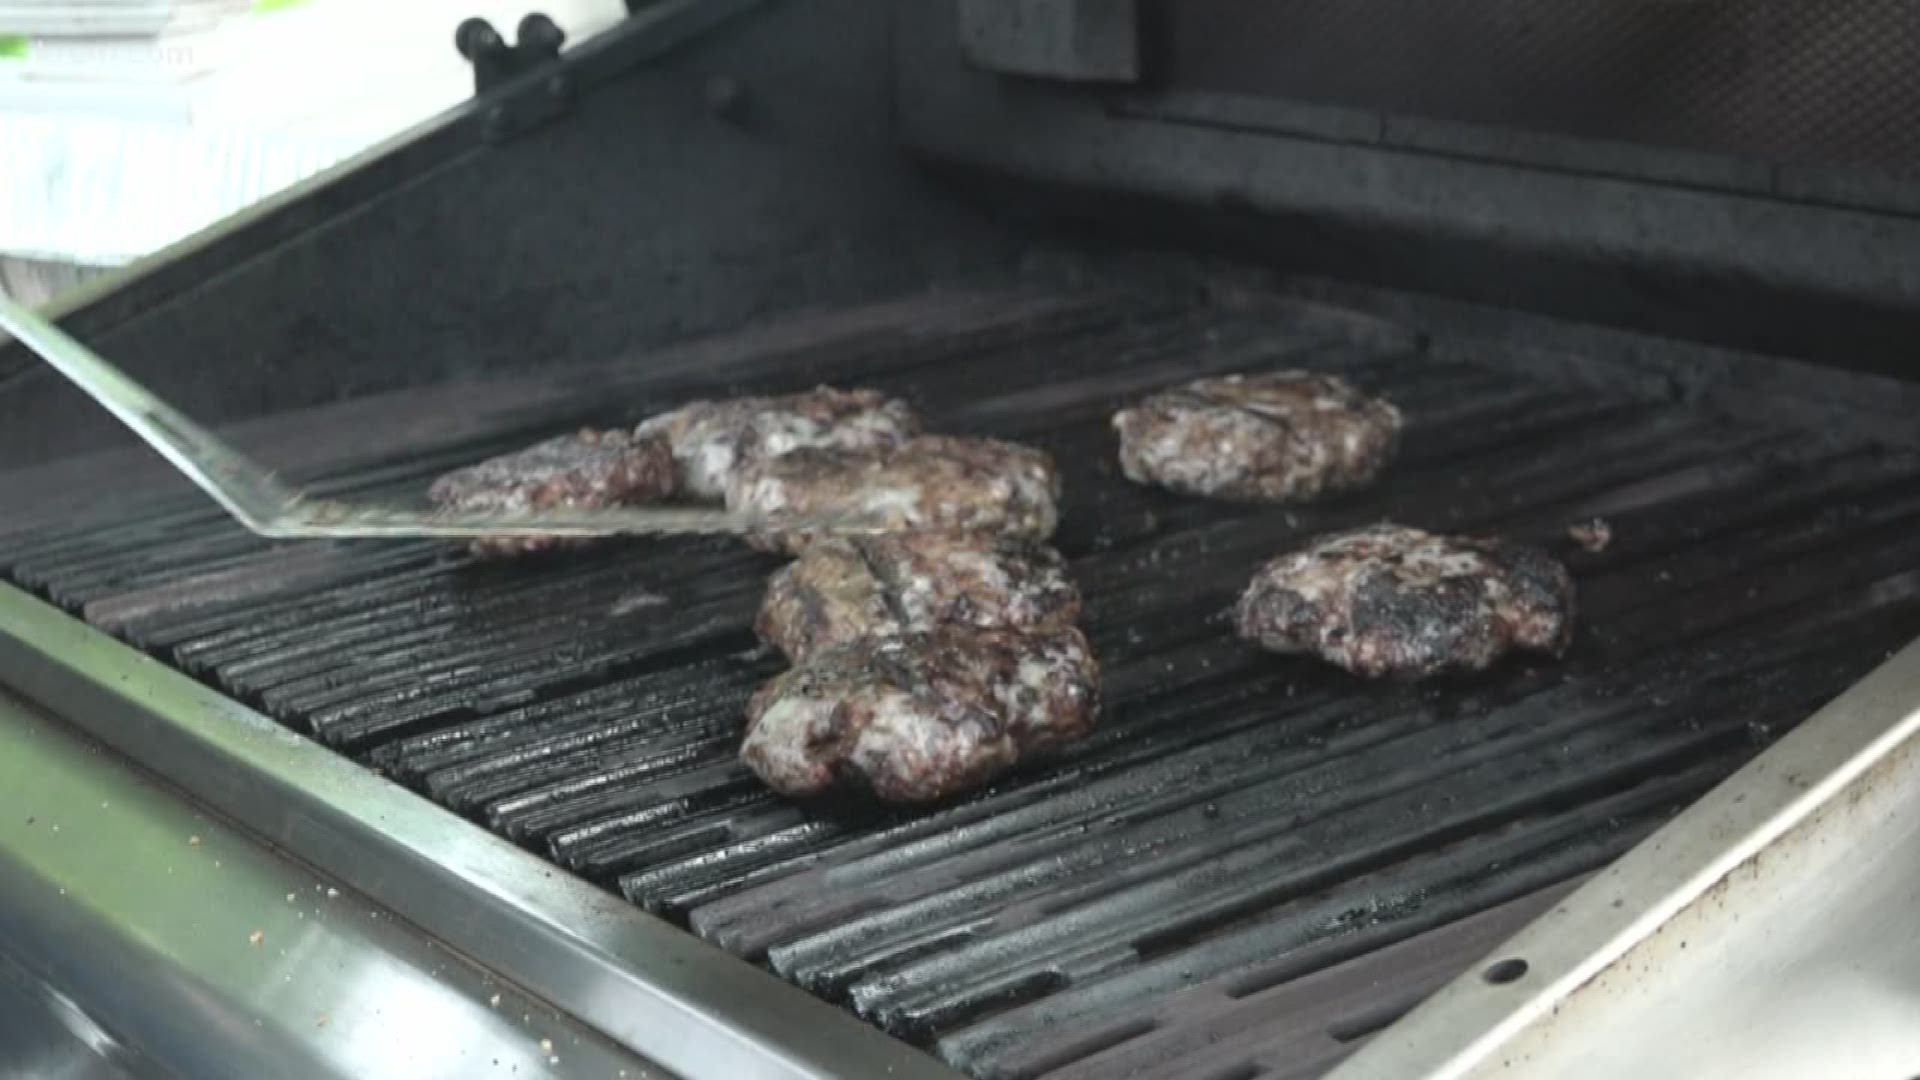 Tom Sherry gets us ready for the weekend with the forecast and this delicious burger recipe.